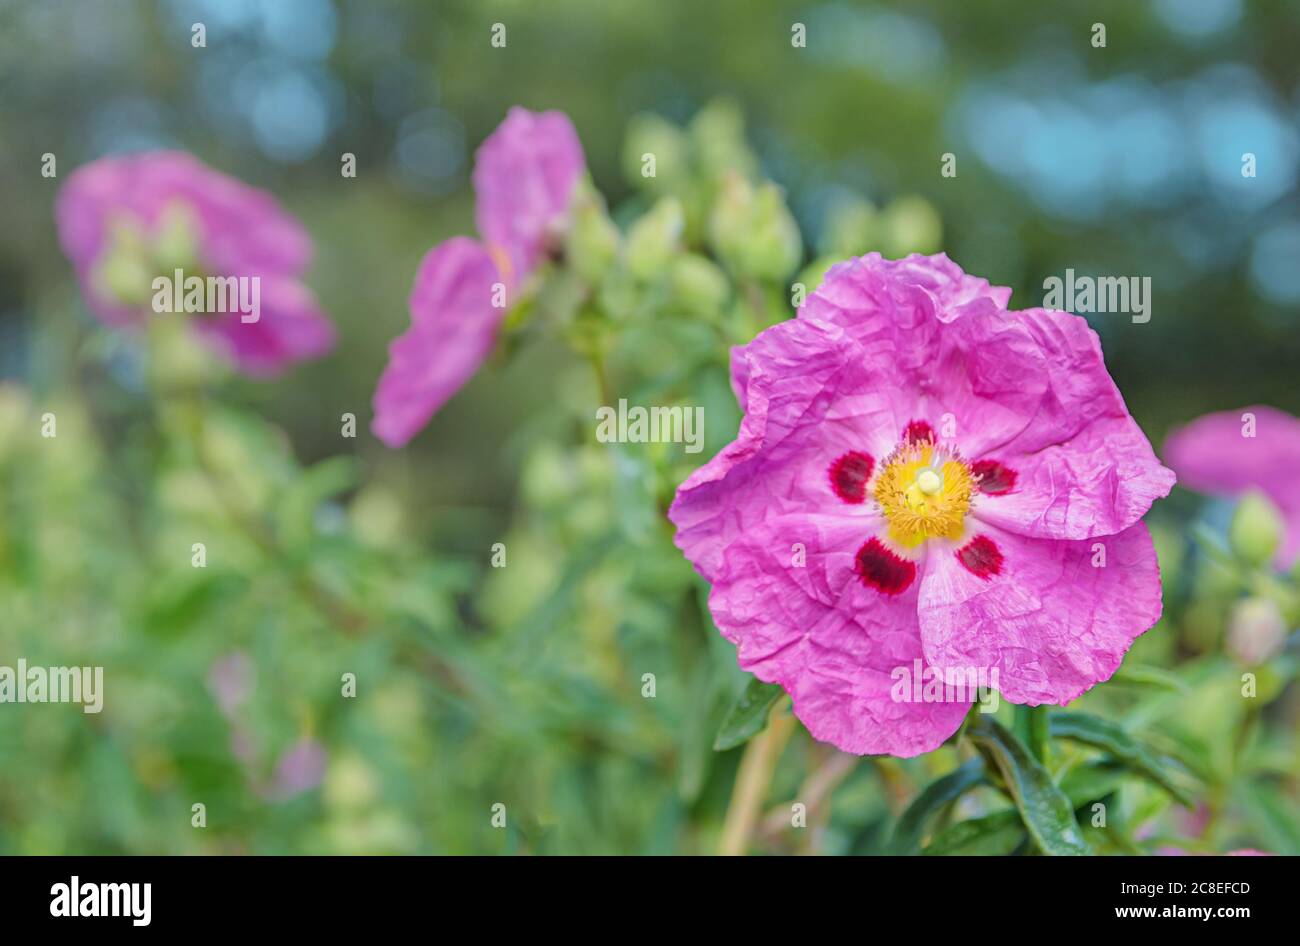 Bright shining pink dipladenia or mandevilla flower on a bright green background Stock Photo